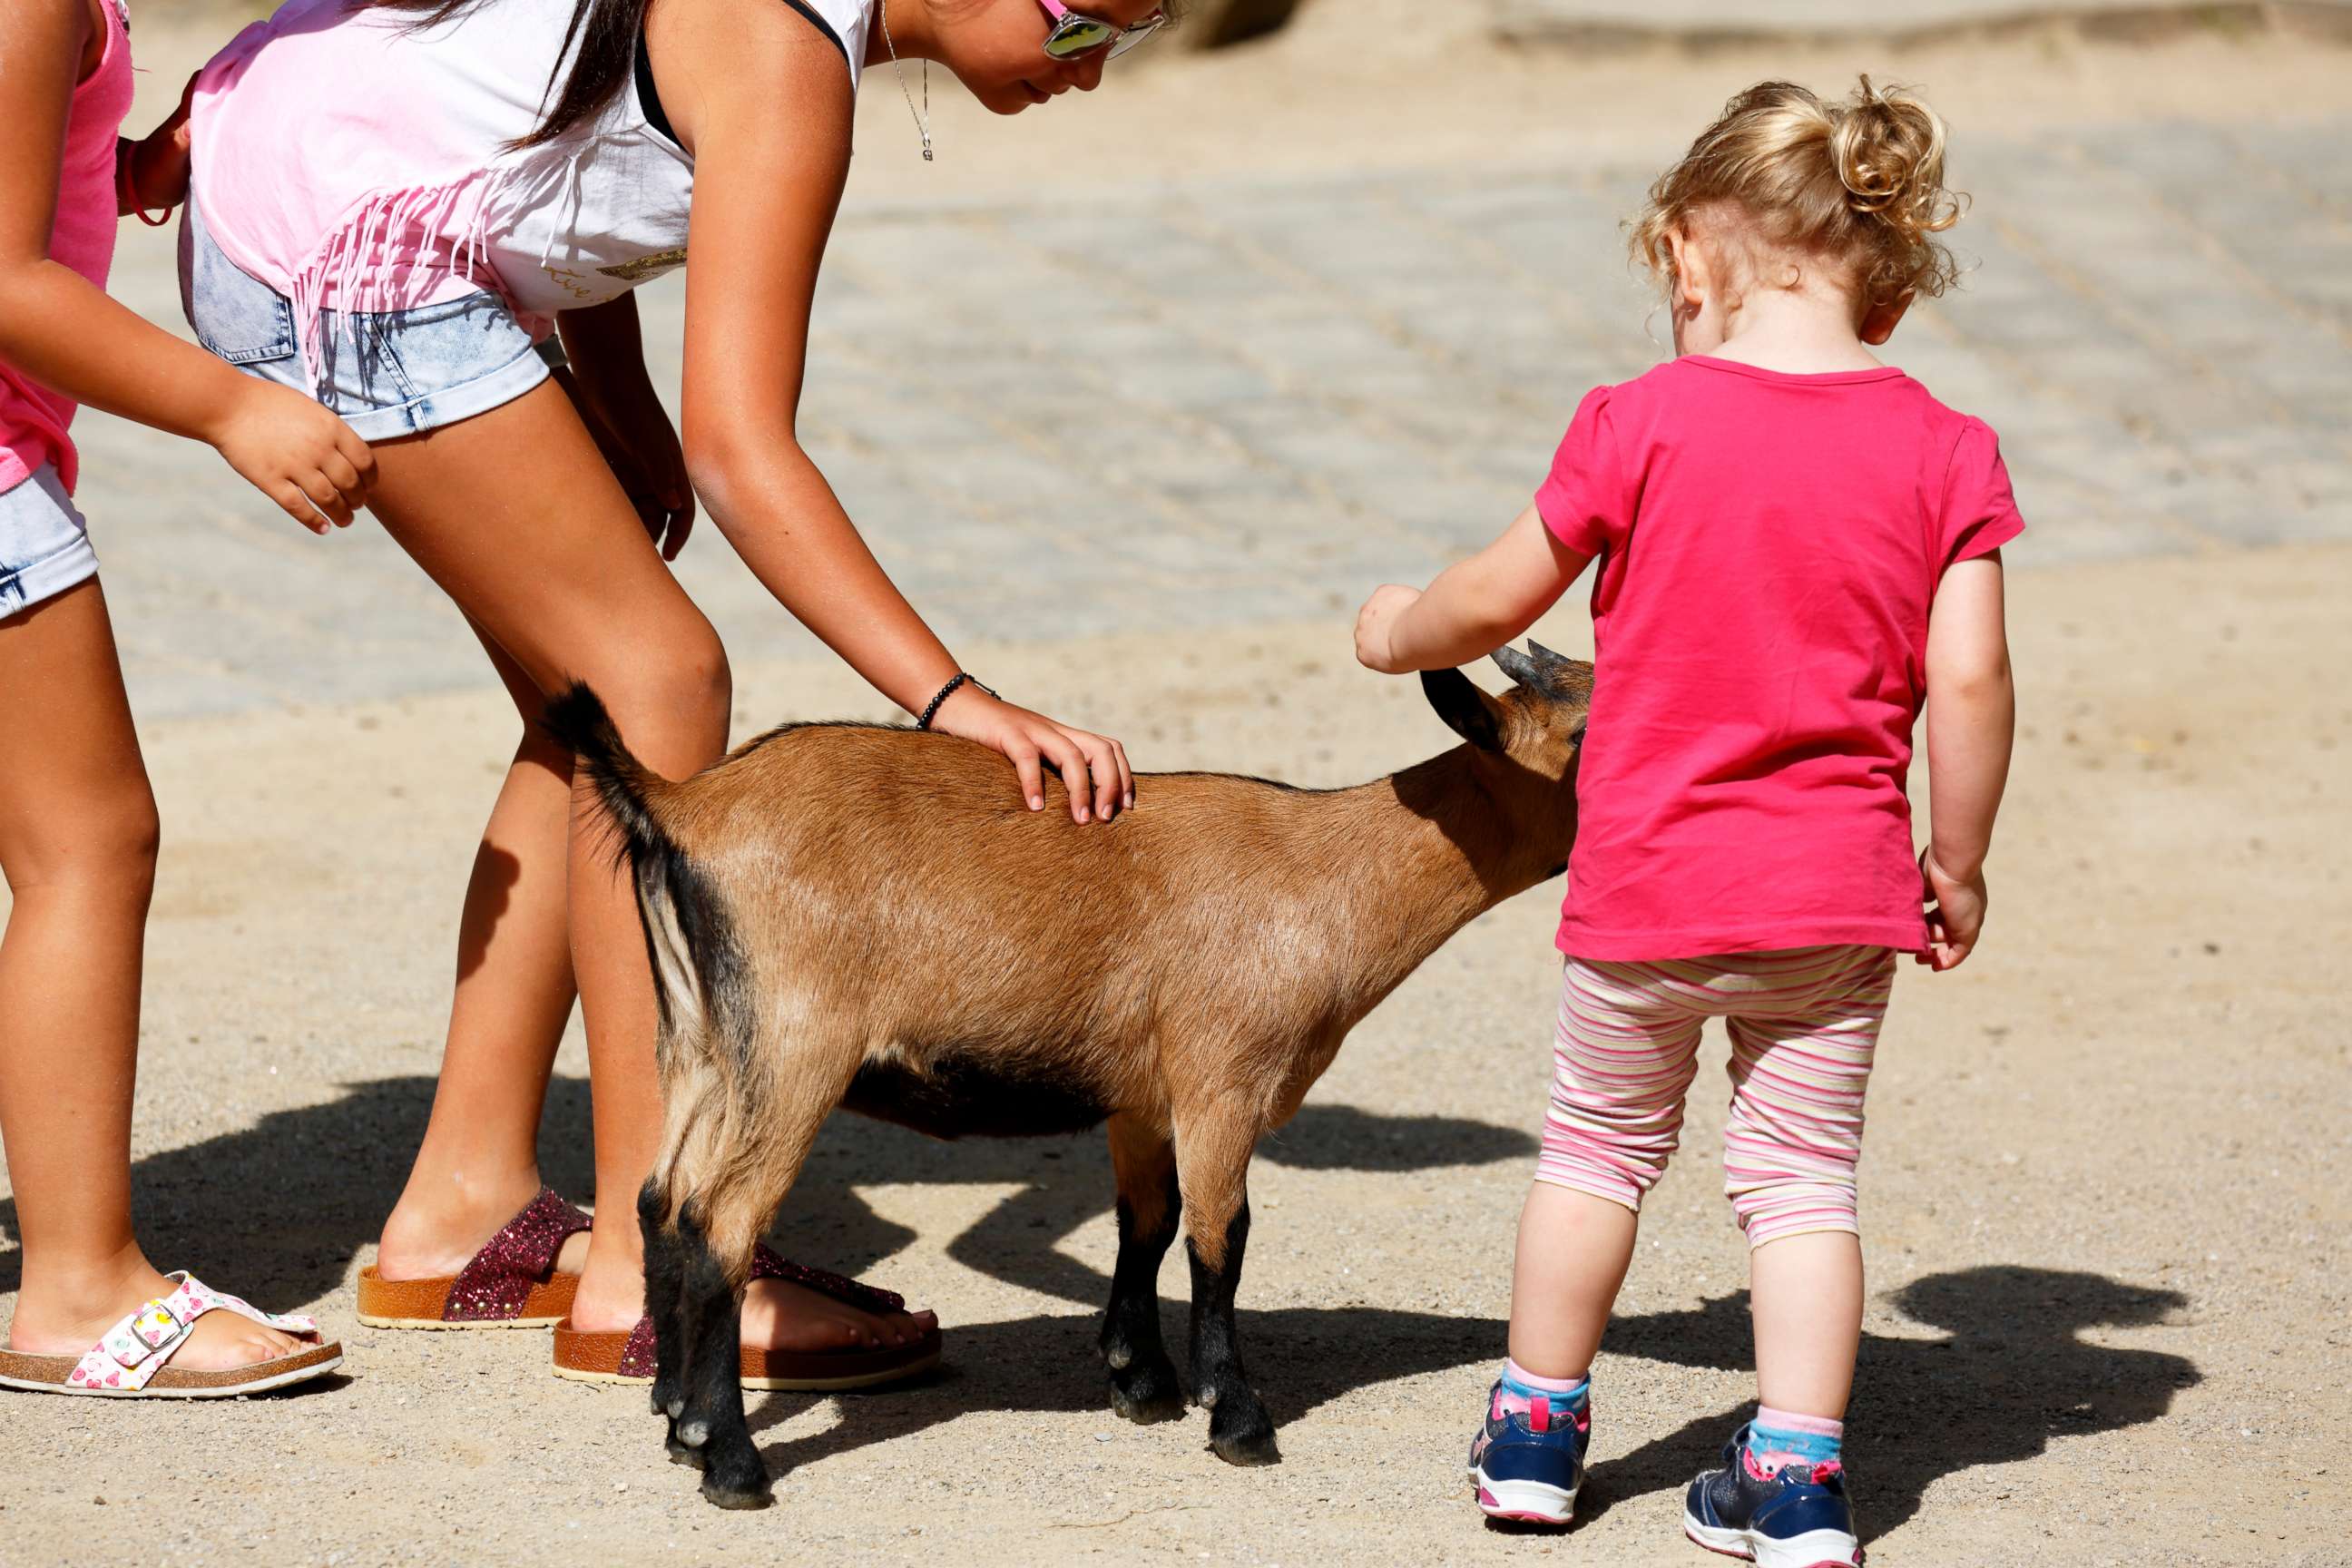 PHOTO: Children pet a goat at a petting zoo in Germany, Aug. 23, 2017.